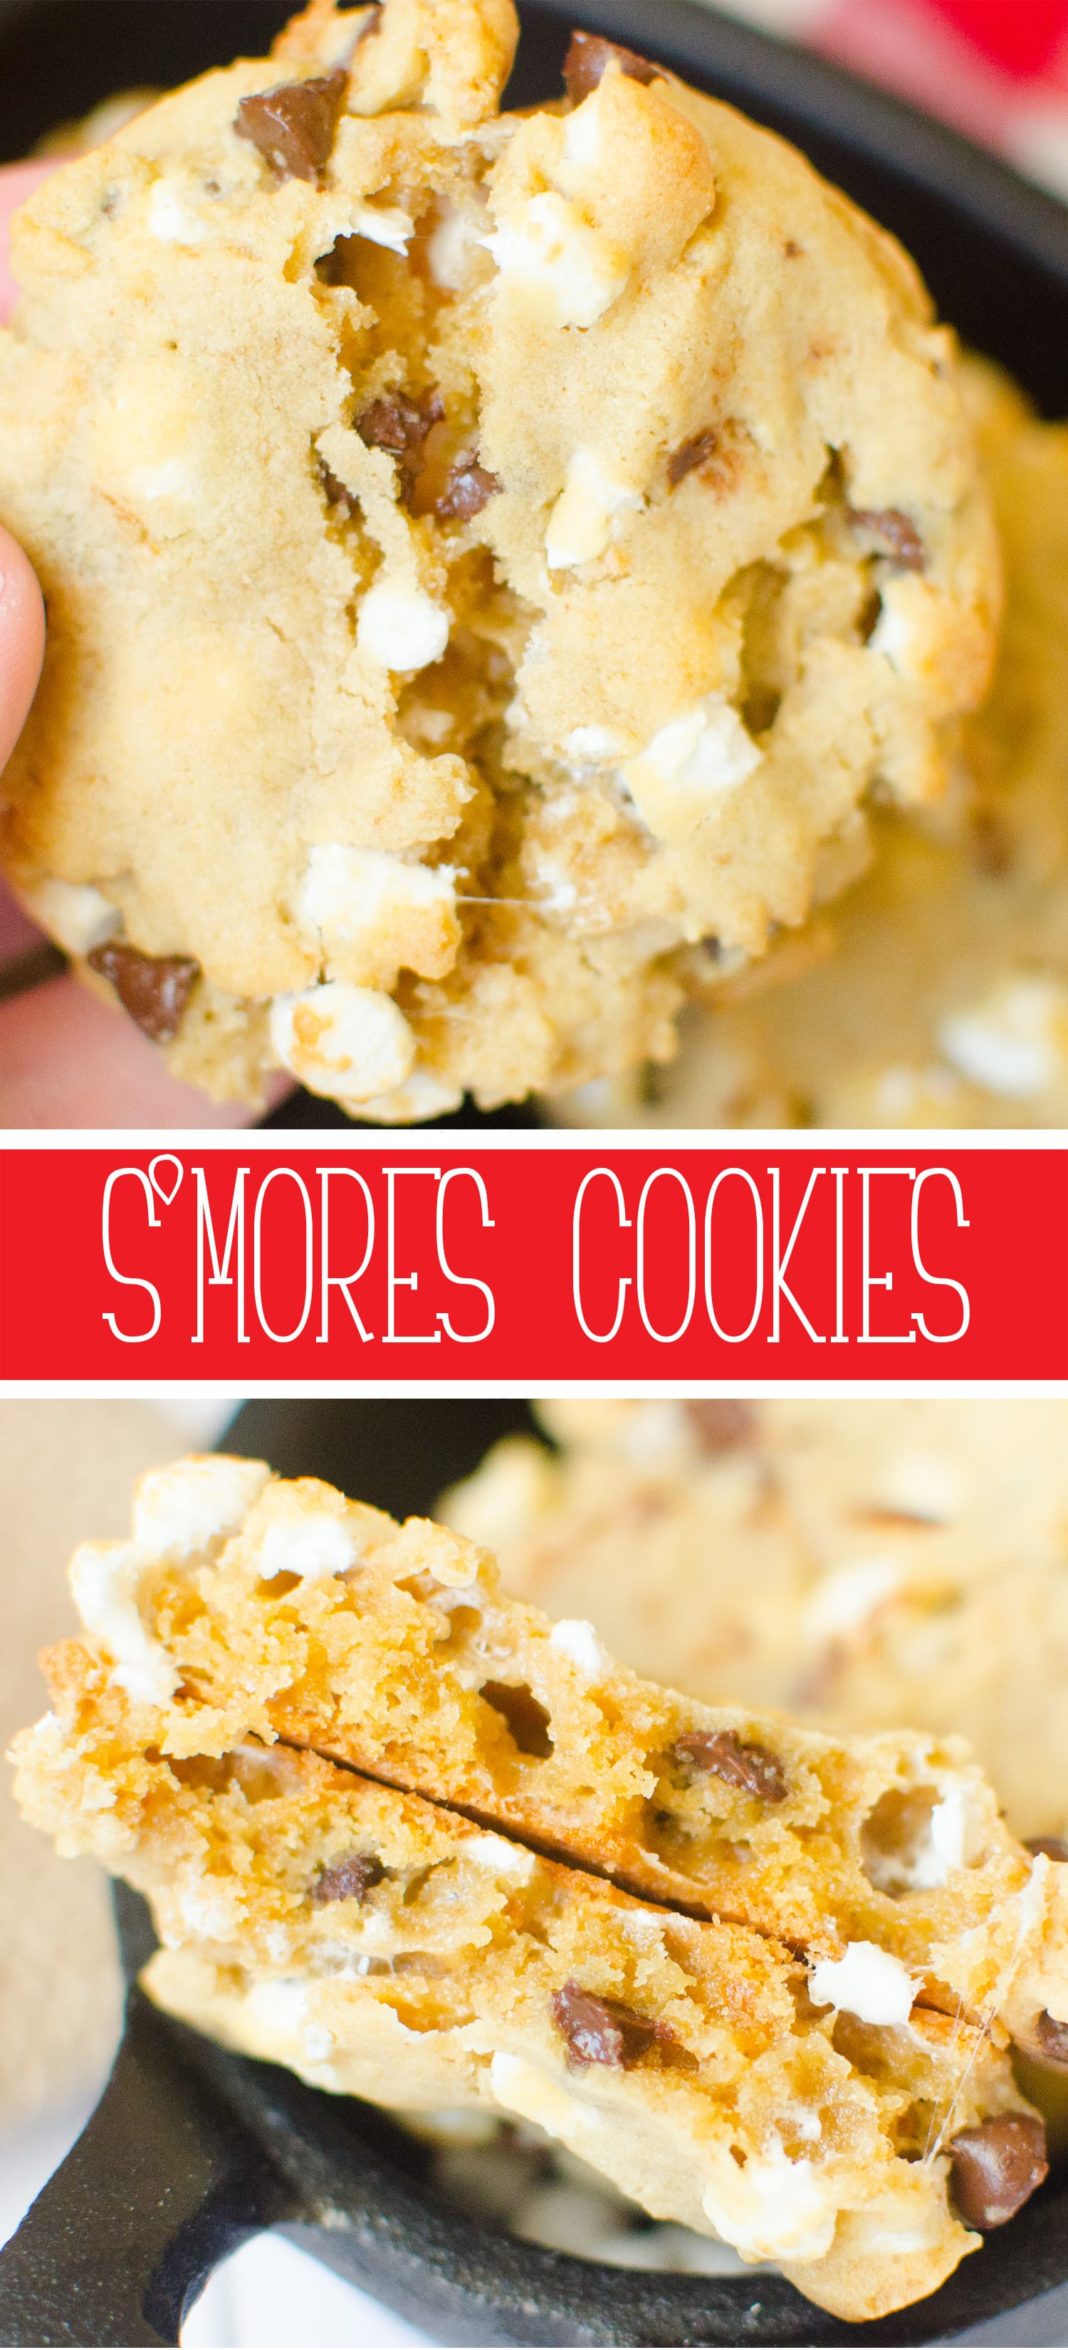 S'mores Cookies will take you right to the campfire! Graham Cracker crumbs, marshmallow bits, chocolate chips with just enough dough to hold it all together. You'll have S'mores right from your oven!